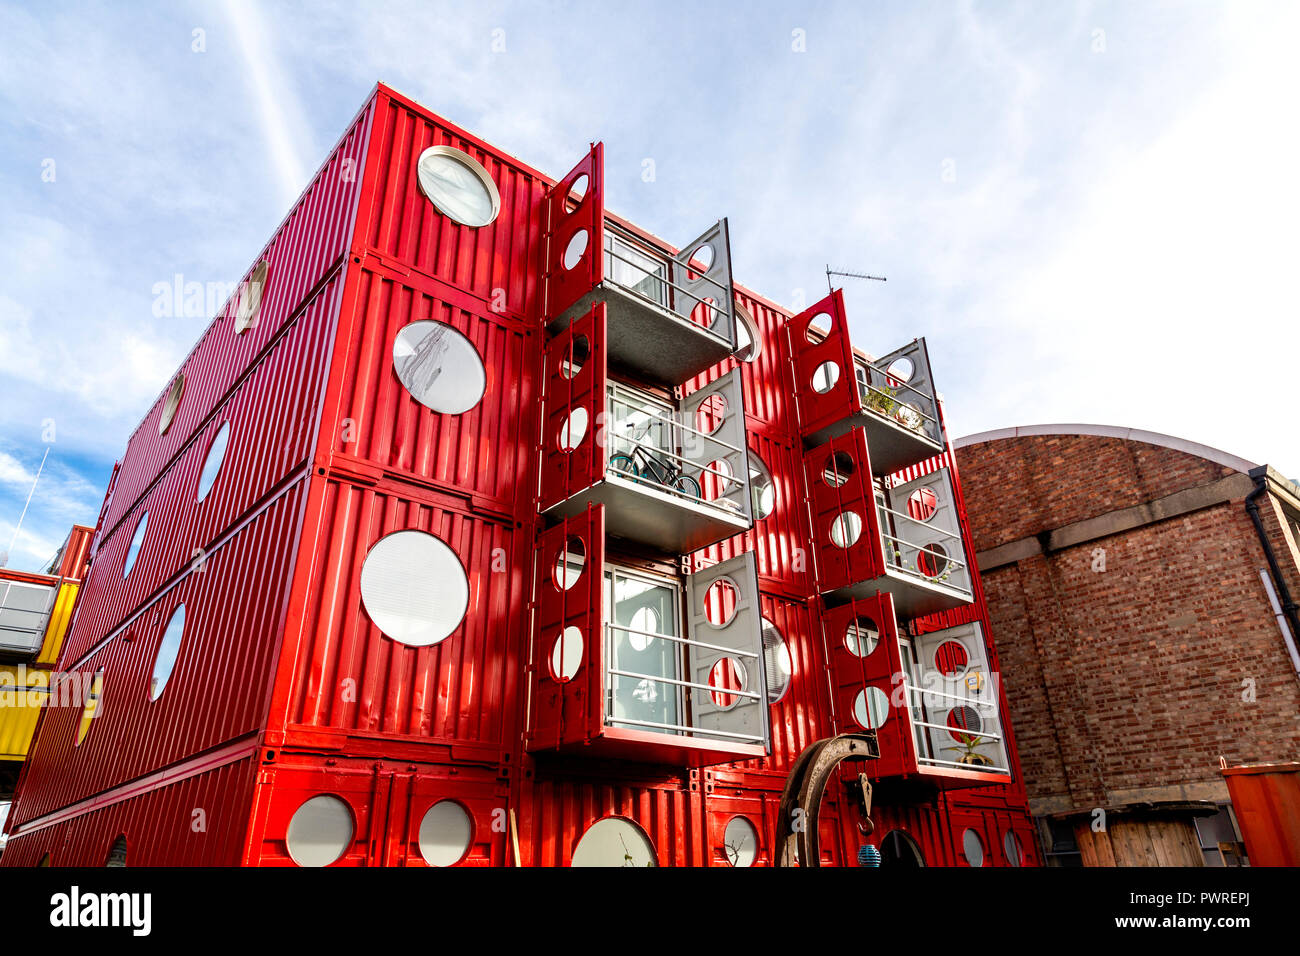 Container City - workspace studios made out of shipping containers in Trinity Buoy Wharf, London, UK Stock Photo